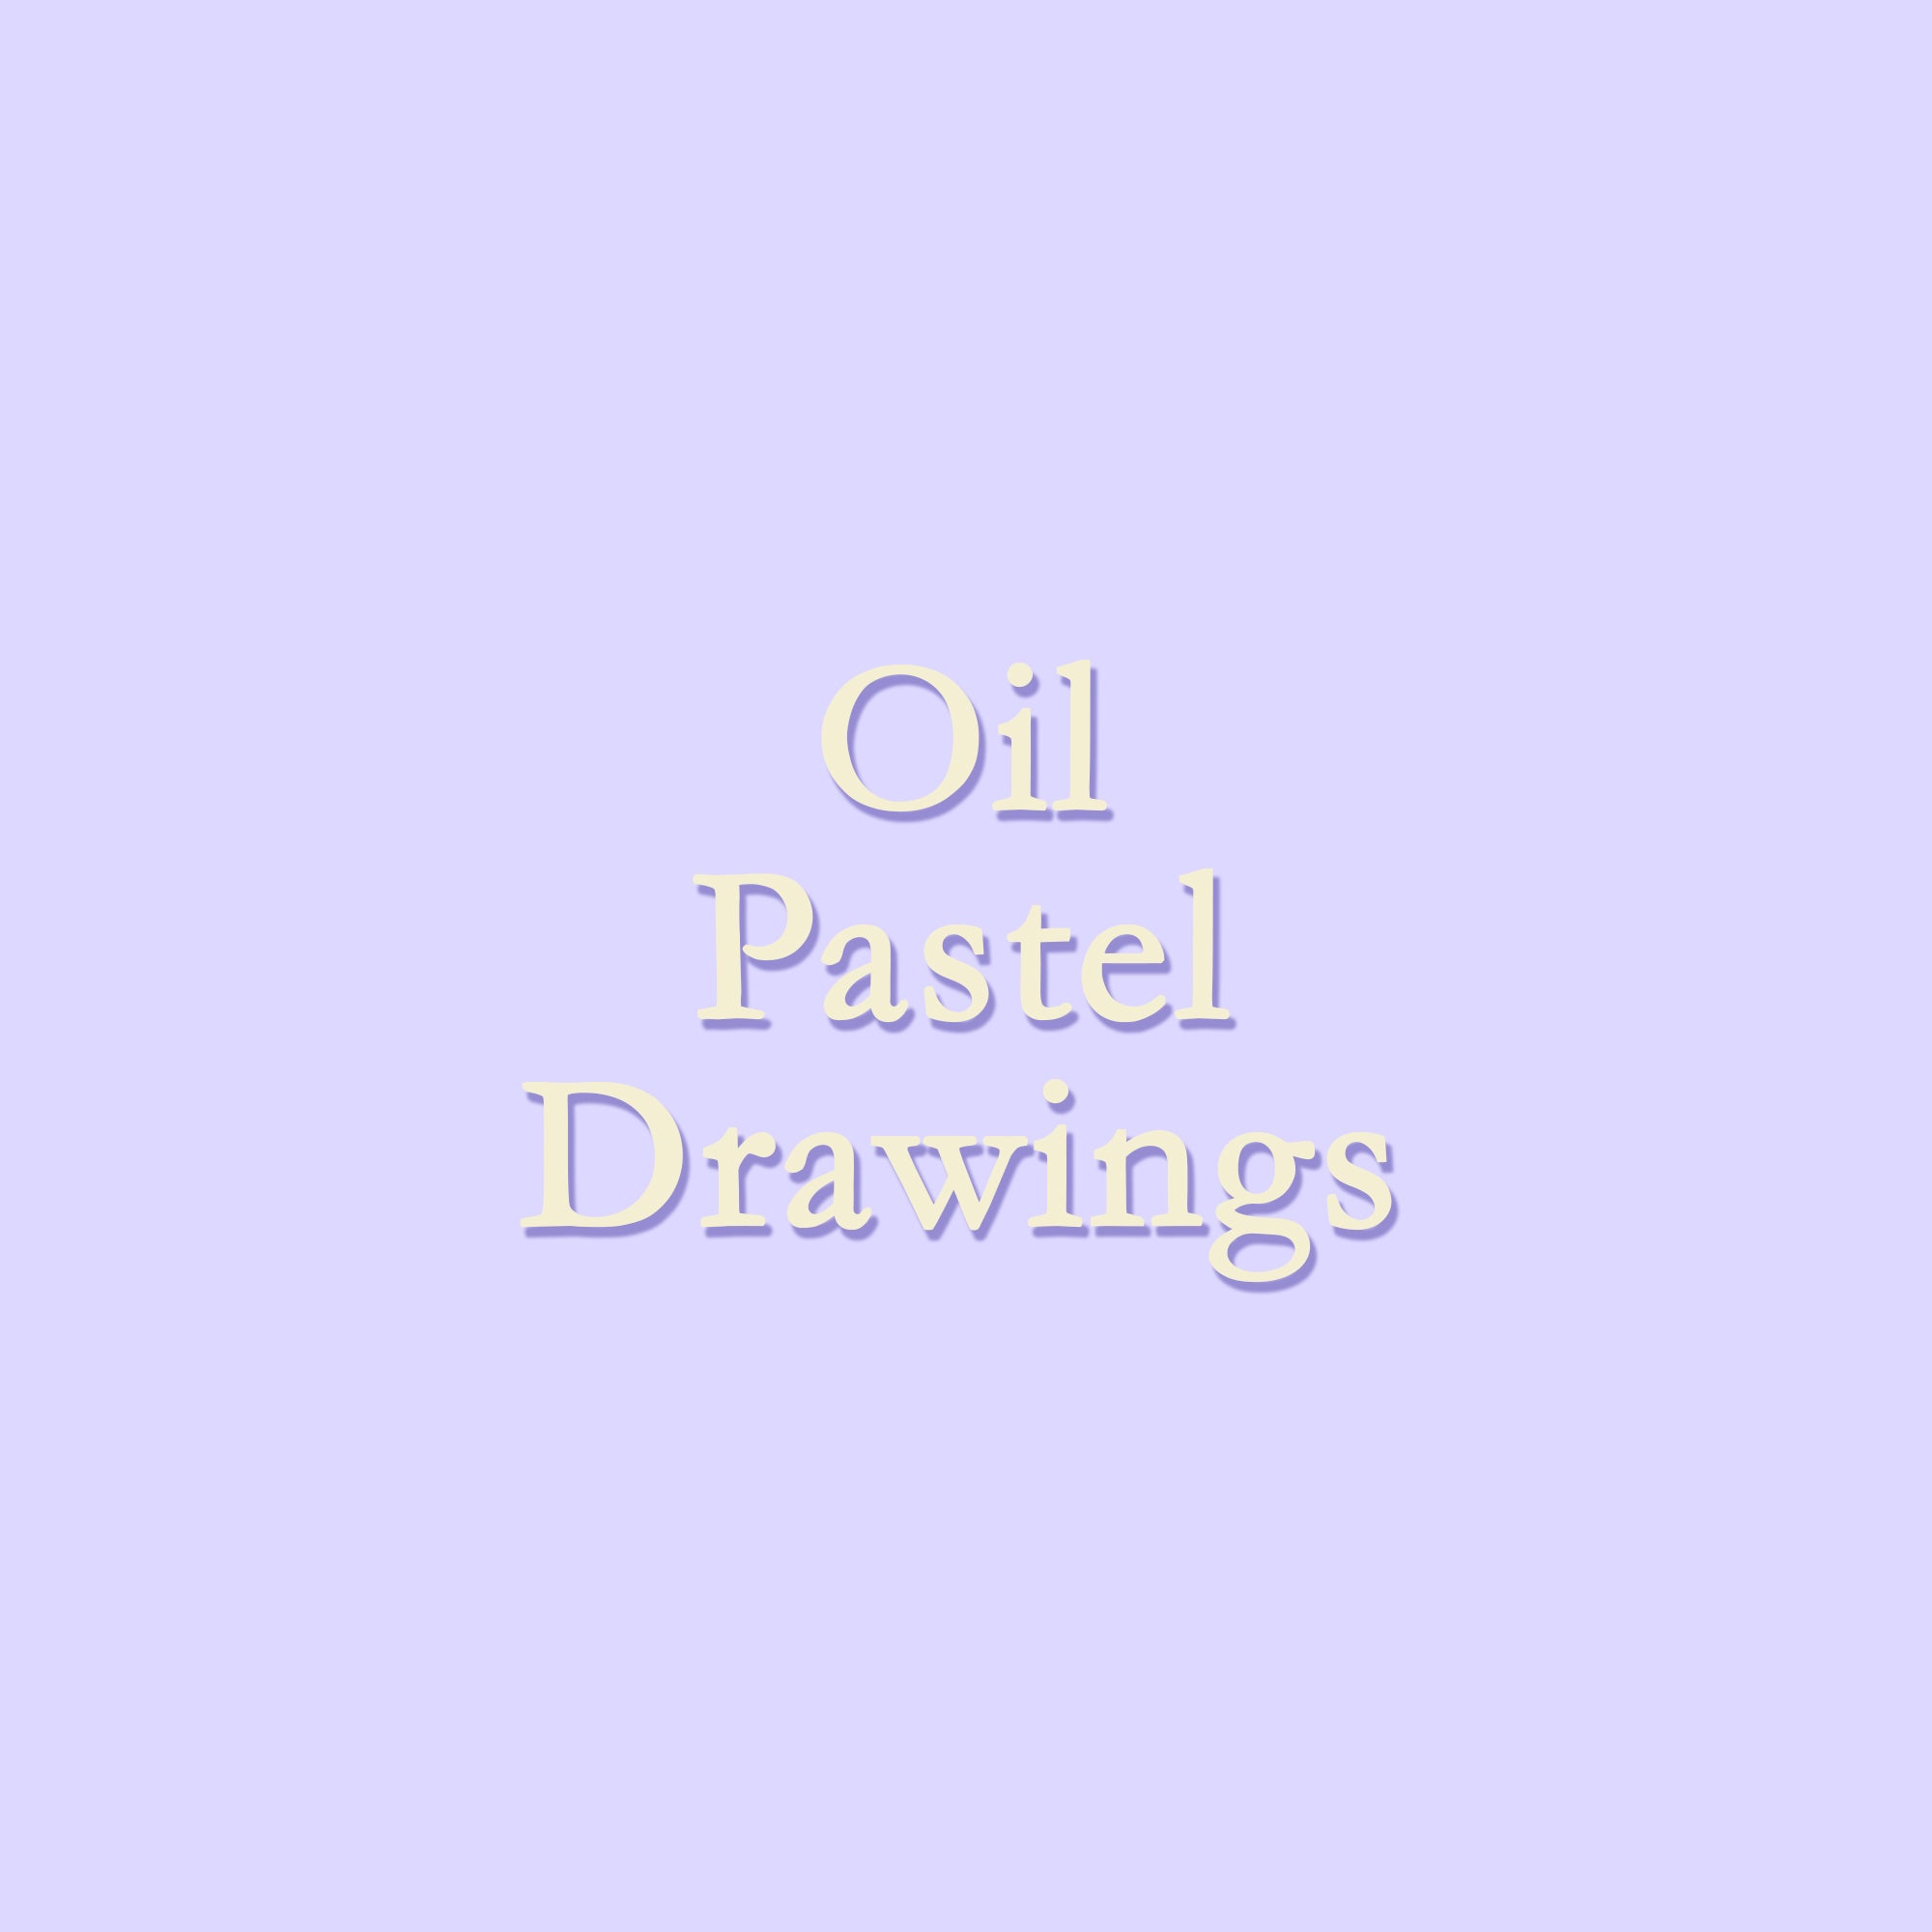 3 Ways to Draw With Oil Pastels - wikiHow